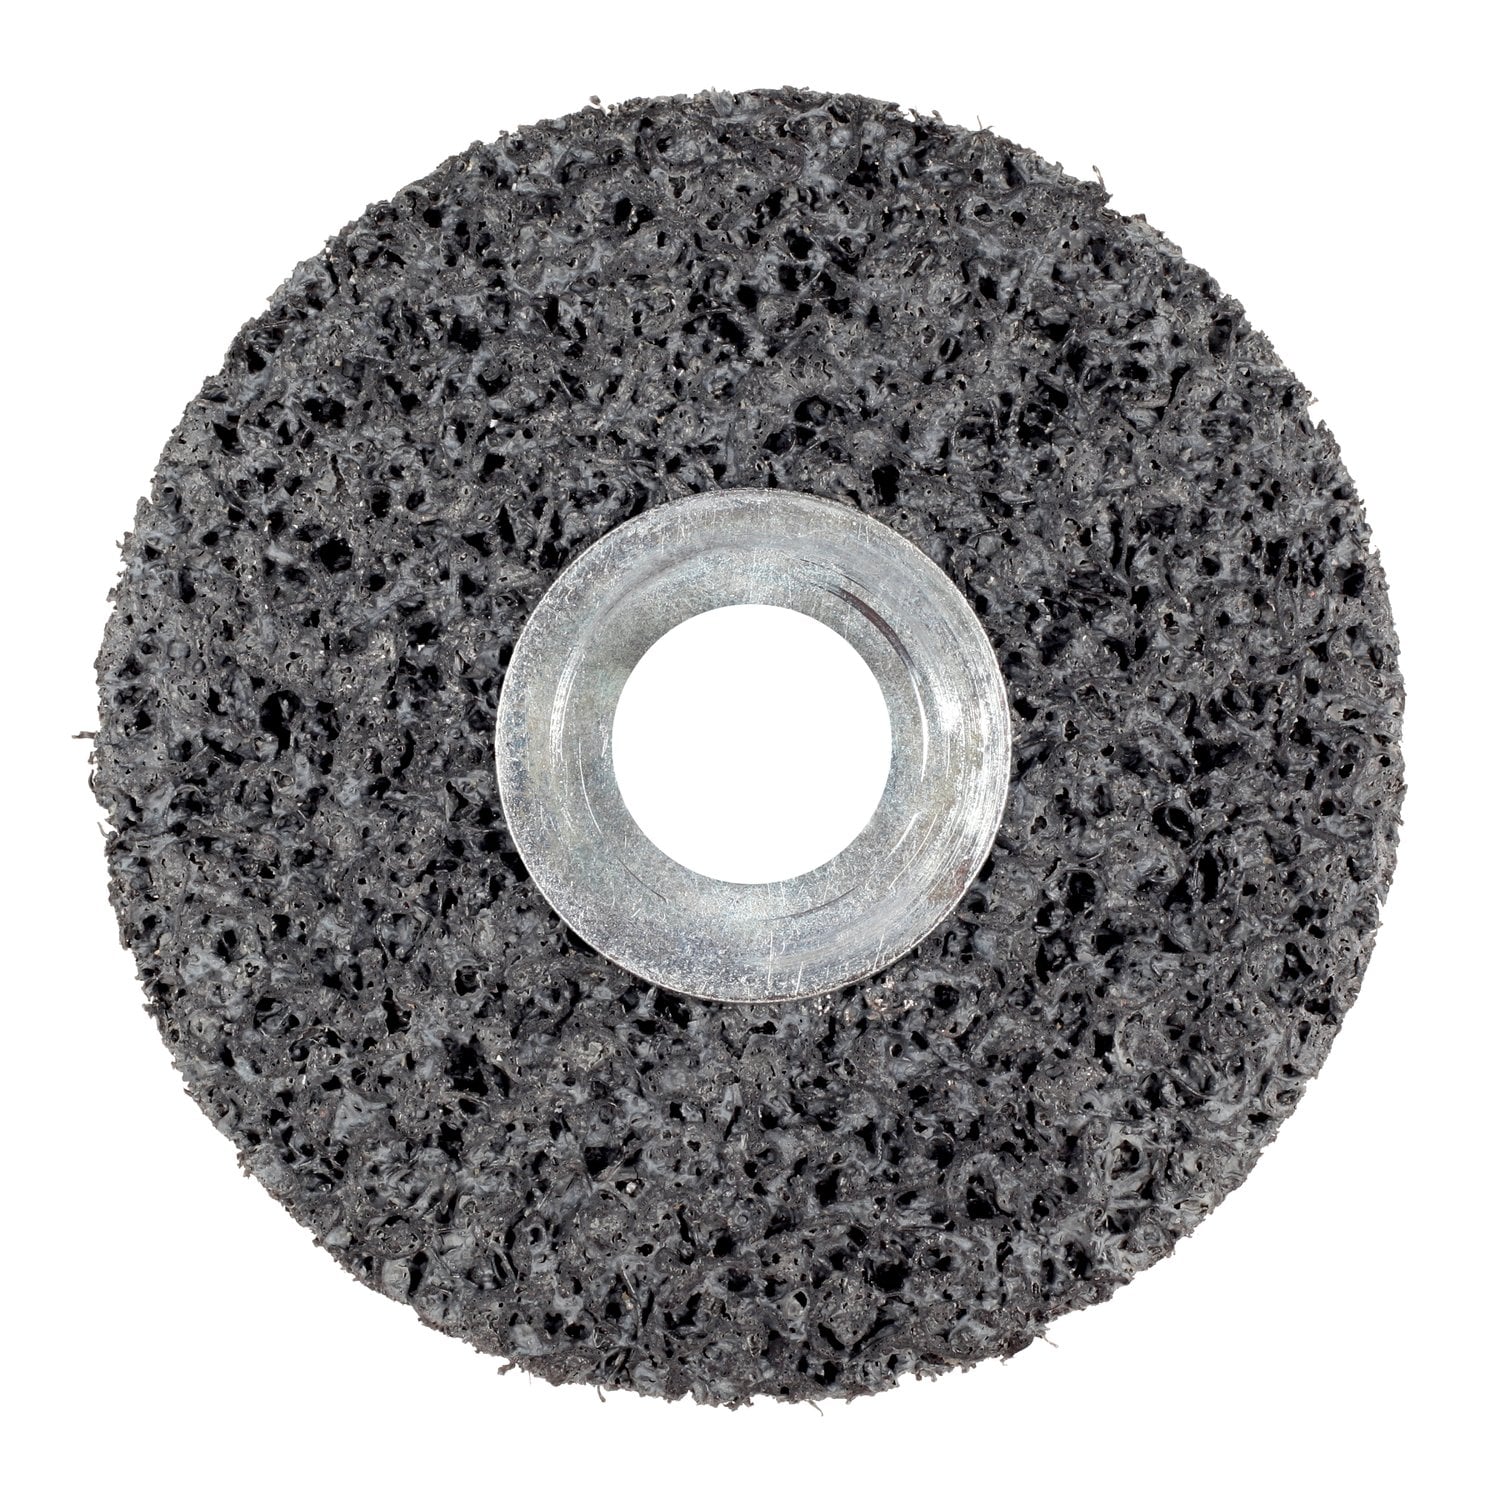 7100051562 - Scotch-Brite Clean and Strip Unitized Wheel, CS-UW, 7S Extra Coarse,
MISC x 1/2 in x MISC, Config